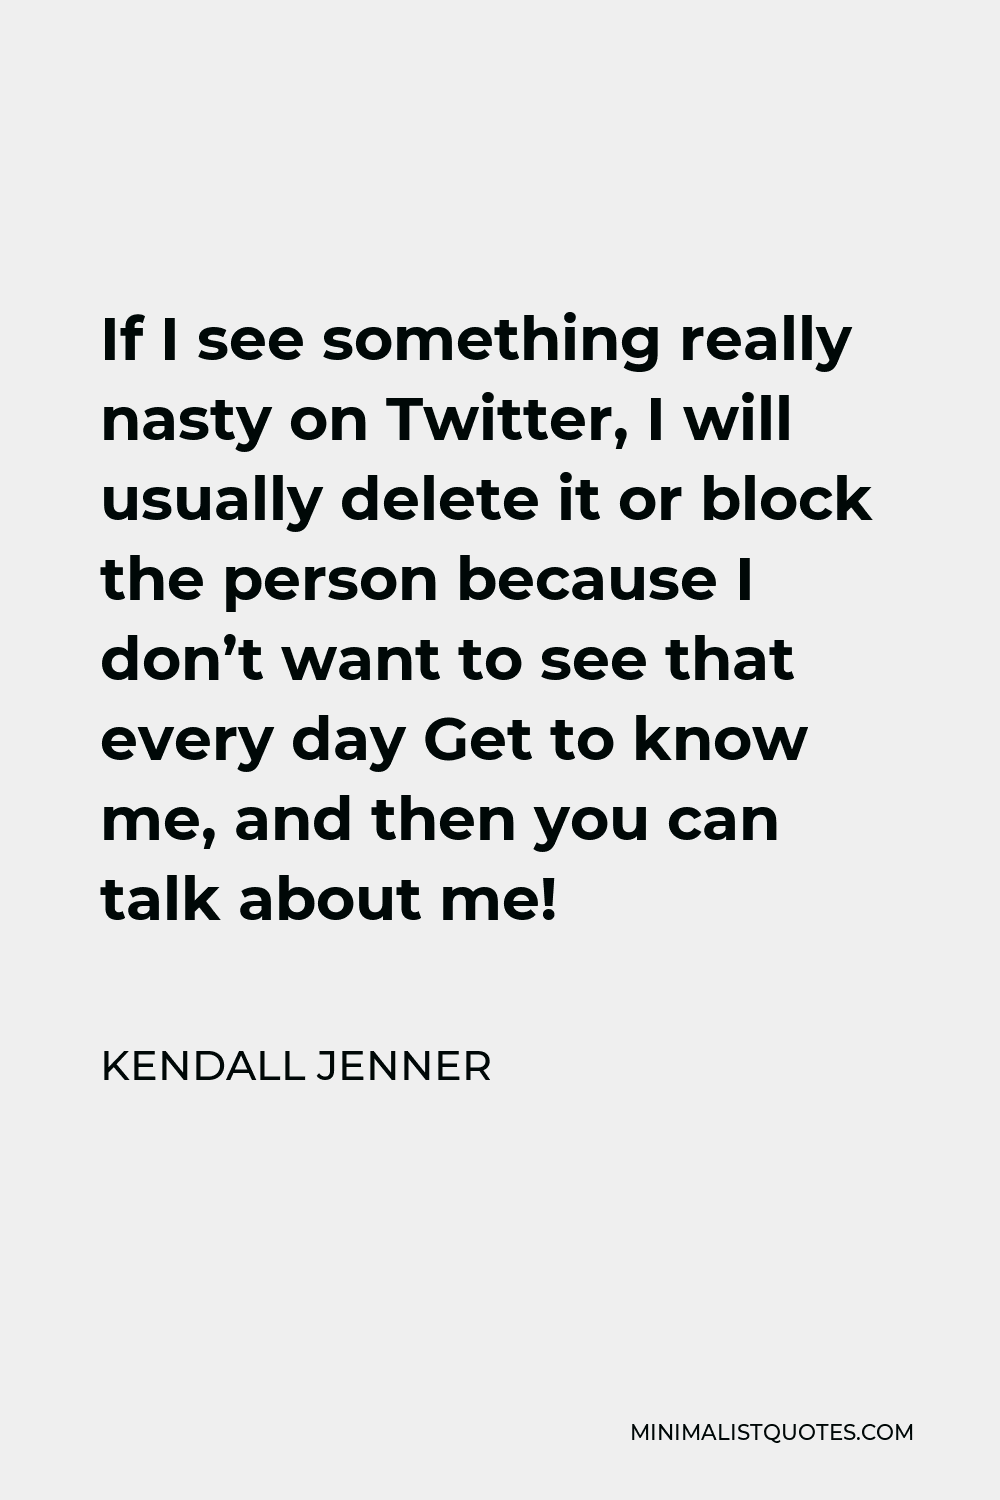 Kendall Jenner Quote - If I see something really nasty on Twitter, I will usually delete it or block the person because I don’t want to see that every day Get to know me, and then you can talk about me!